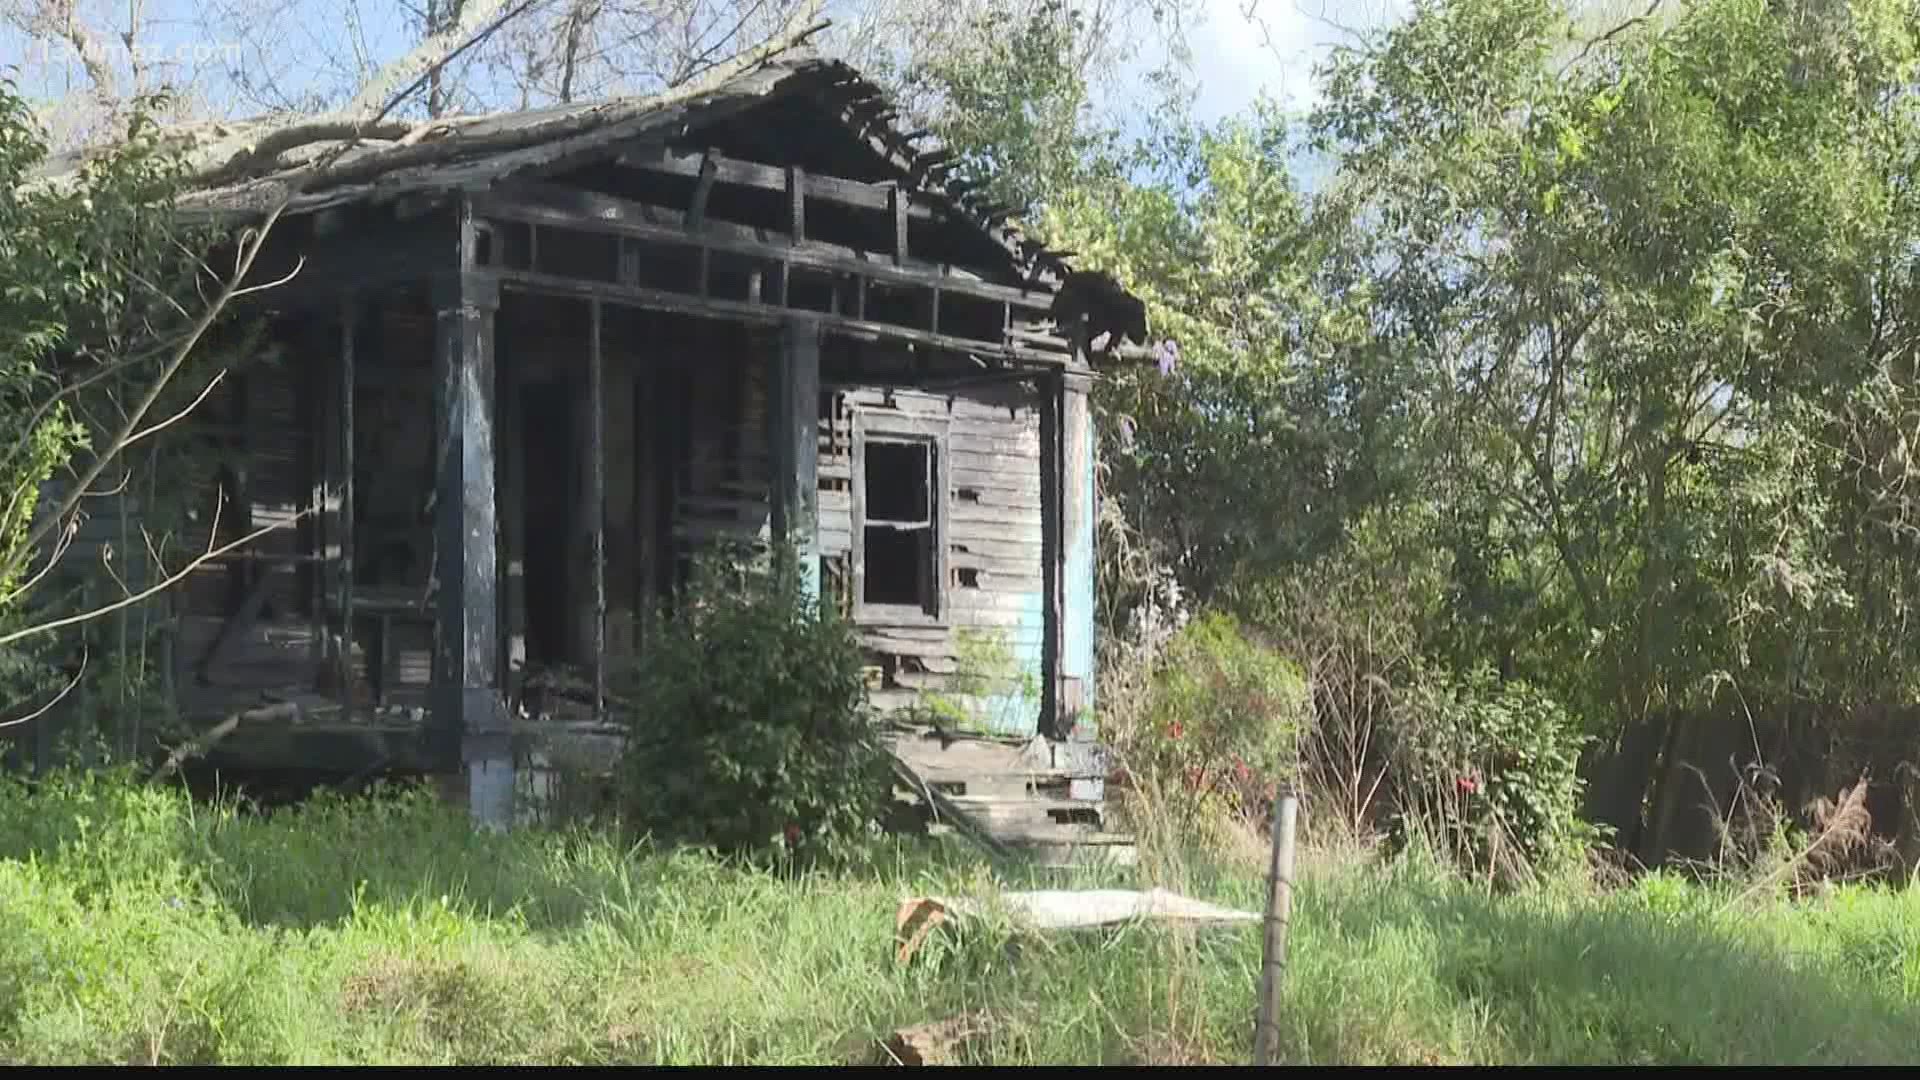 Macon-Bibb County Mayor Lester Miller and Code Enforcement Director JT Ricketson say the county plans to demolish at least nine blighted structures